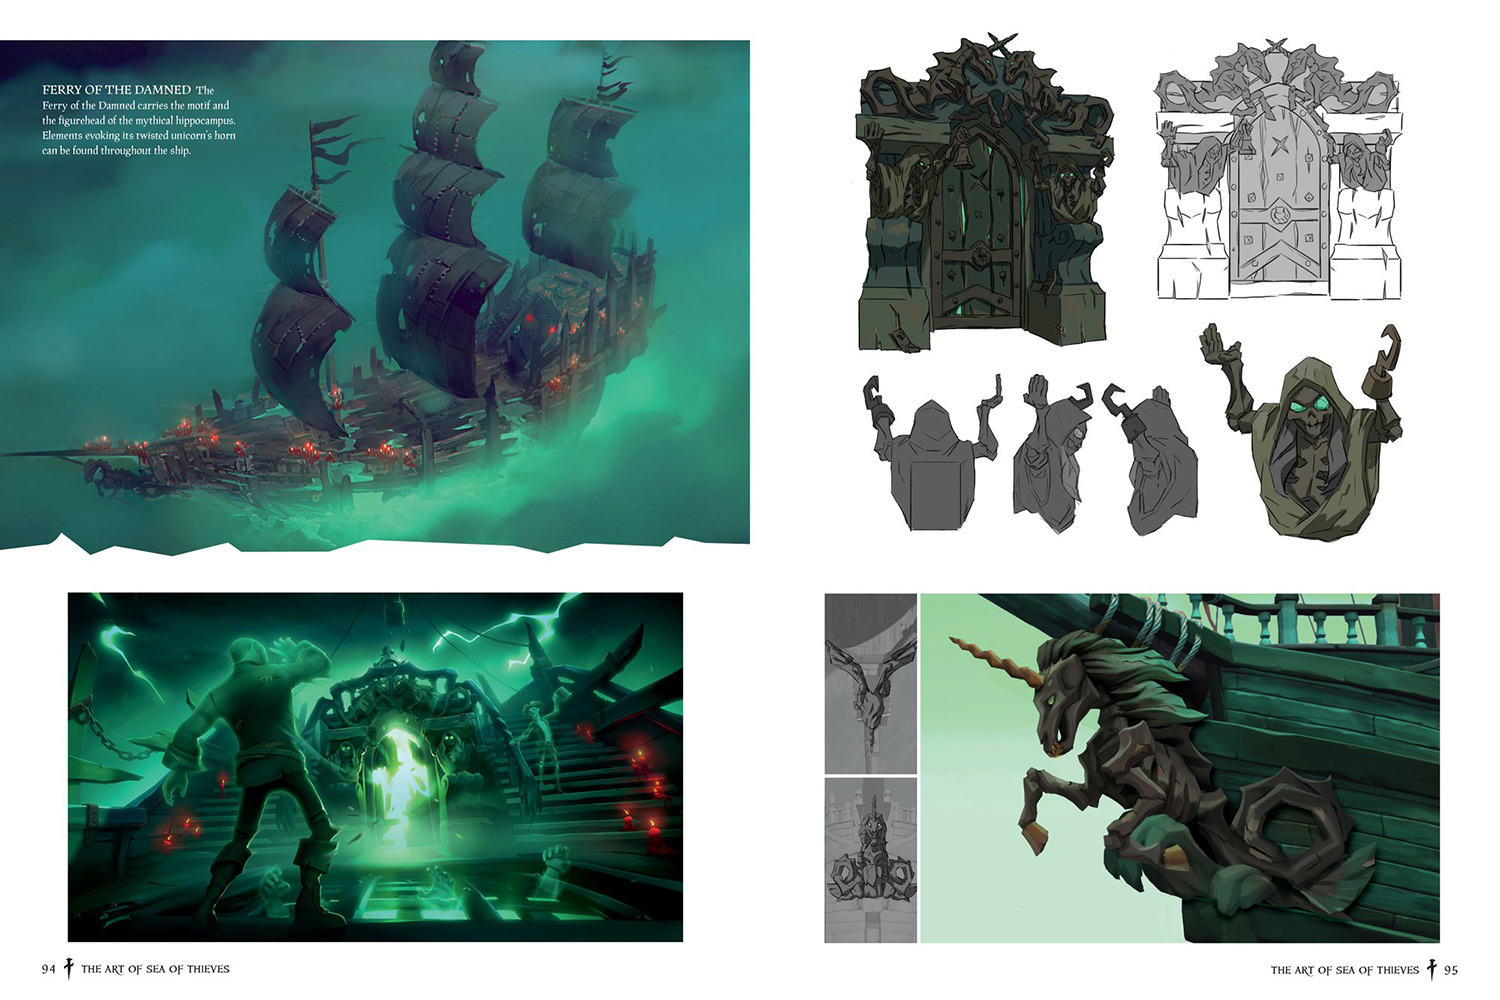 The Art of Sea of Thieves is a collectible art book featuring over 200 page...